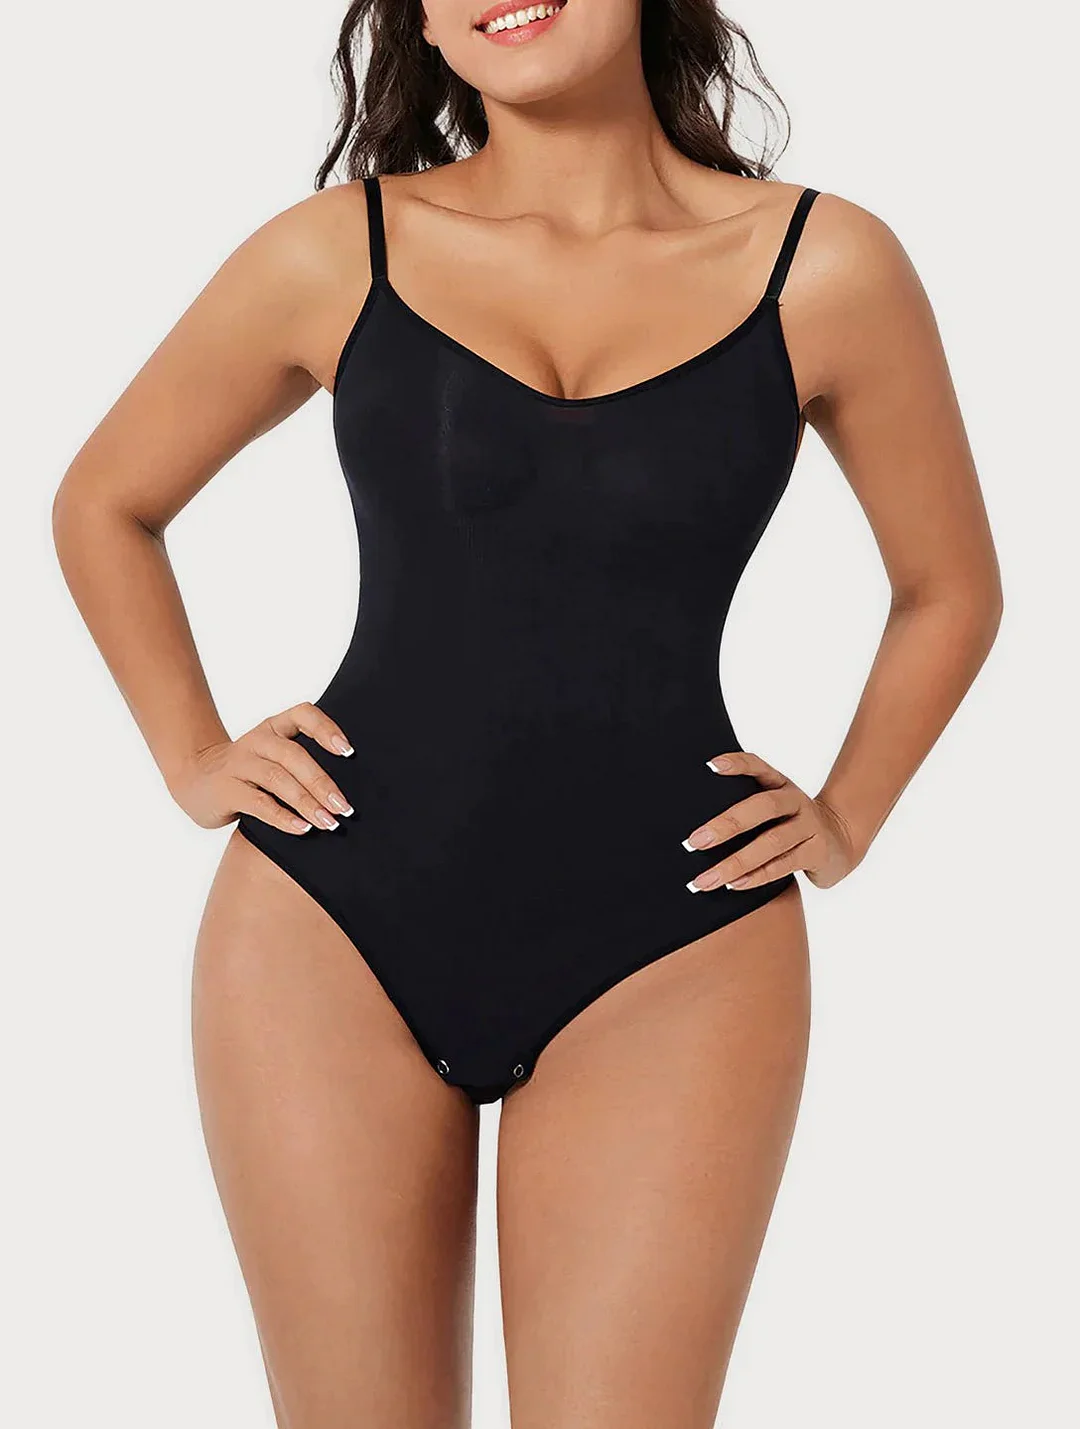 Limited Time Discount Last Day🔥Snatched Shapewear Bodysuit